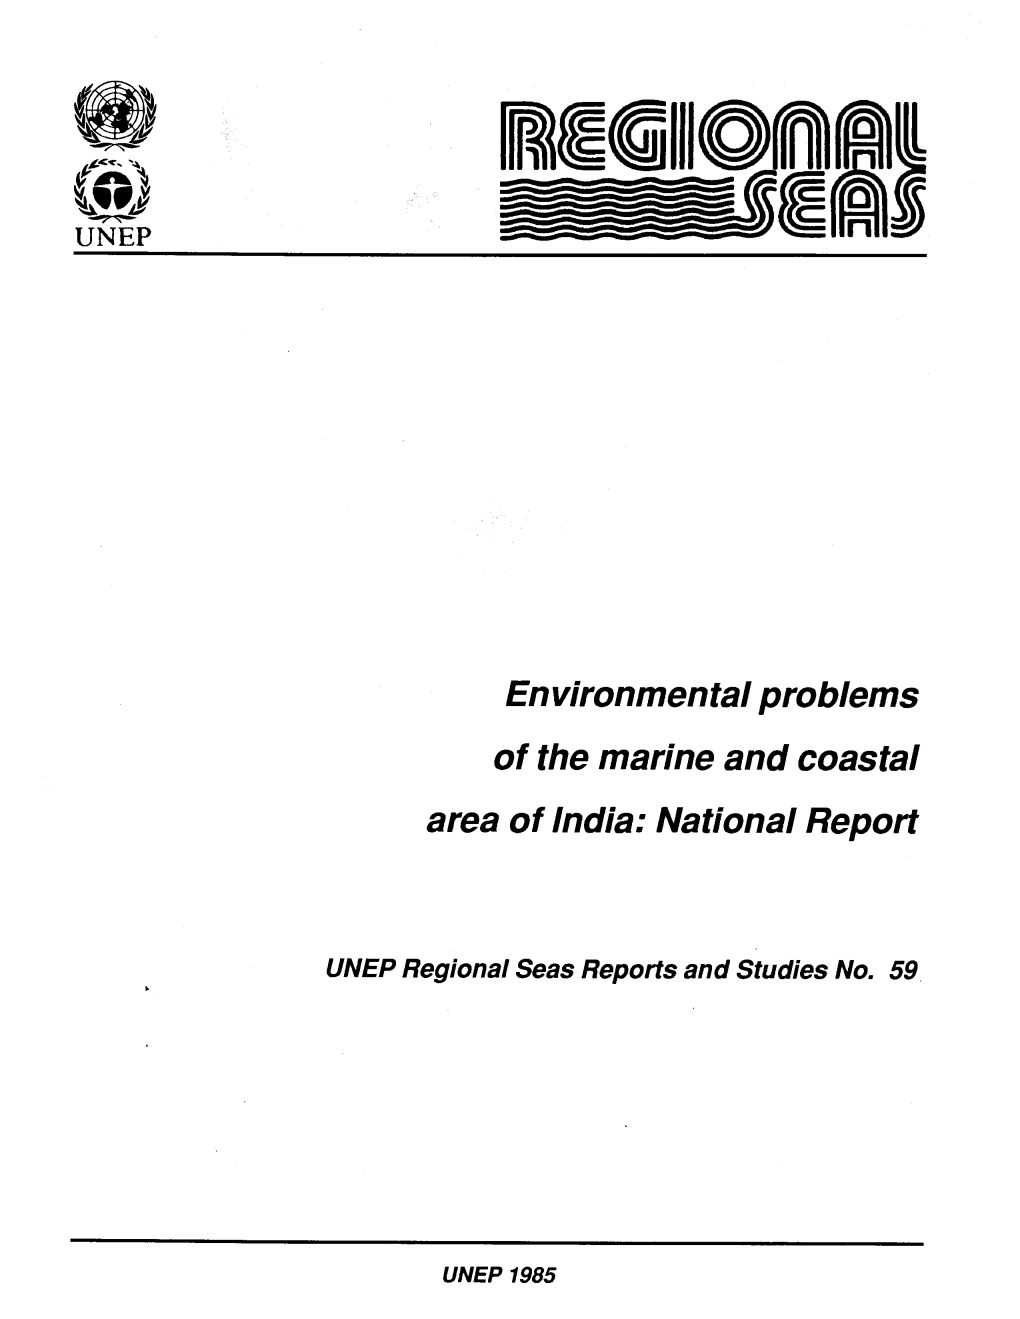 Environmental Problems of the Marine and Coastal Area